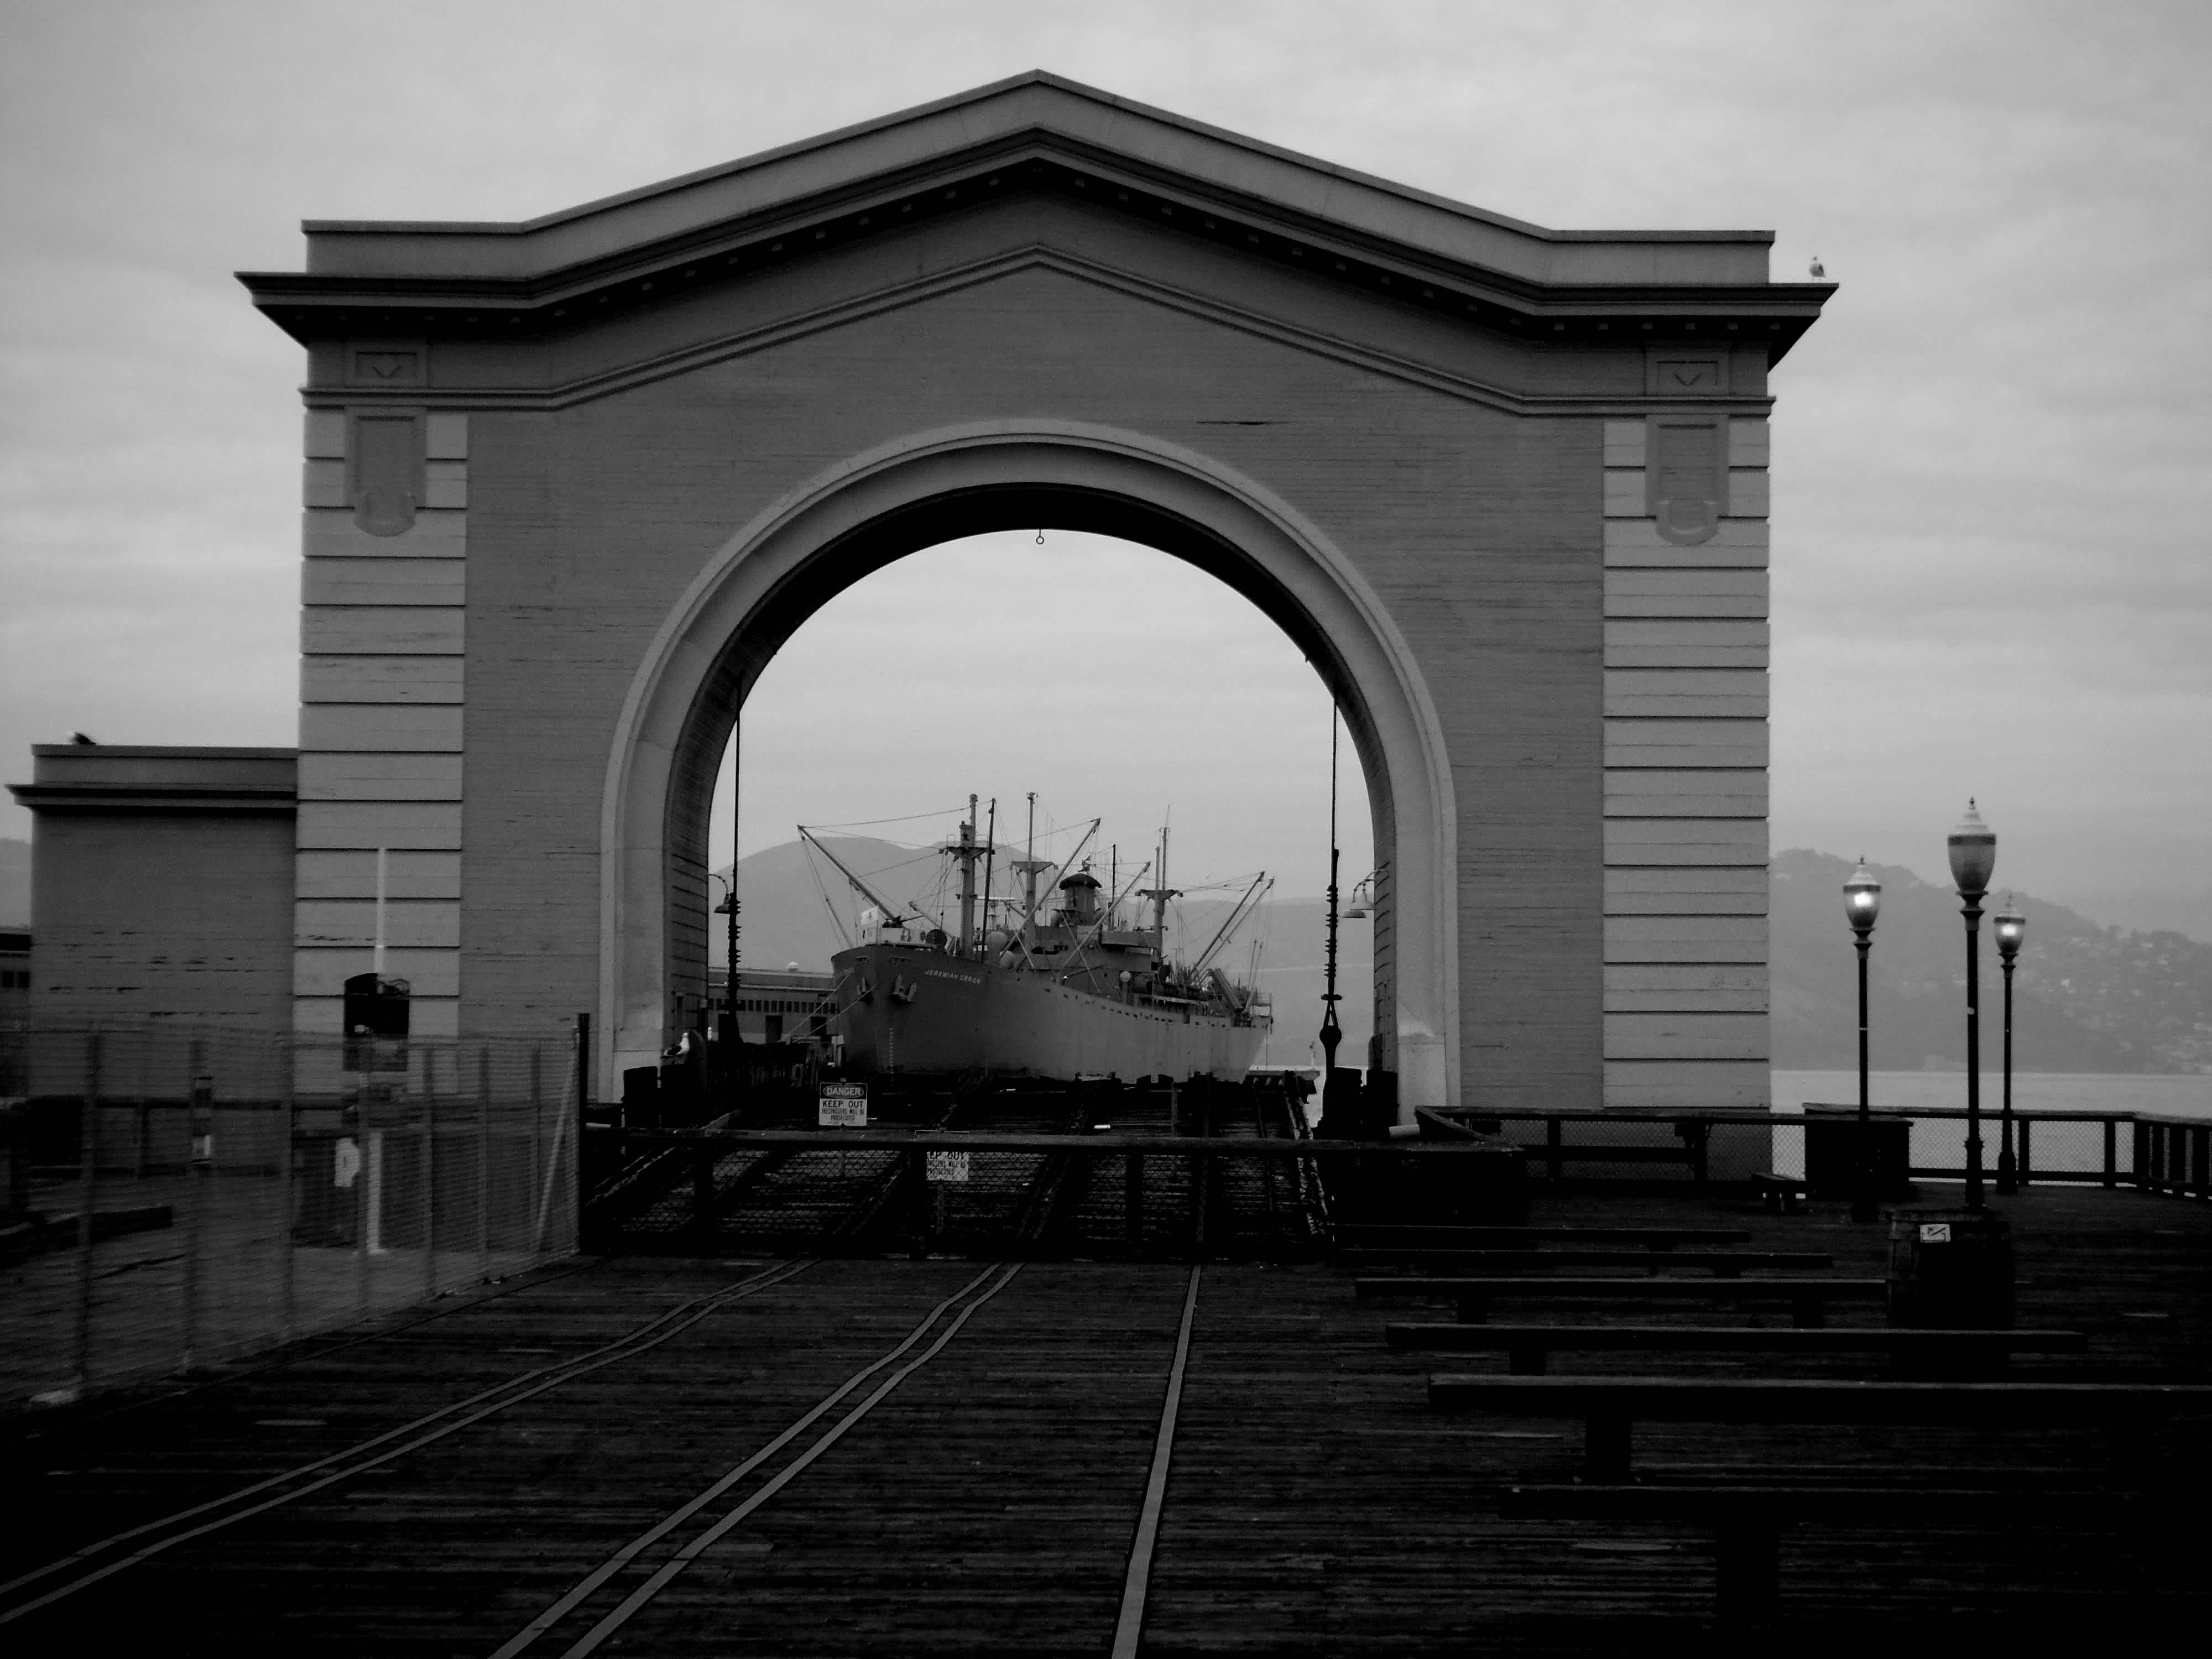 Archway leading to a boat resting in the water against a mountain background in black and white in Embarcadero, San Francisco, California. 